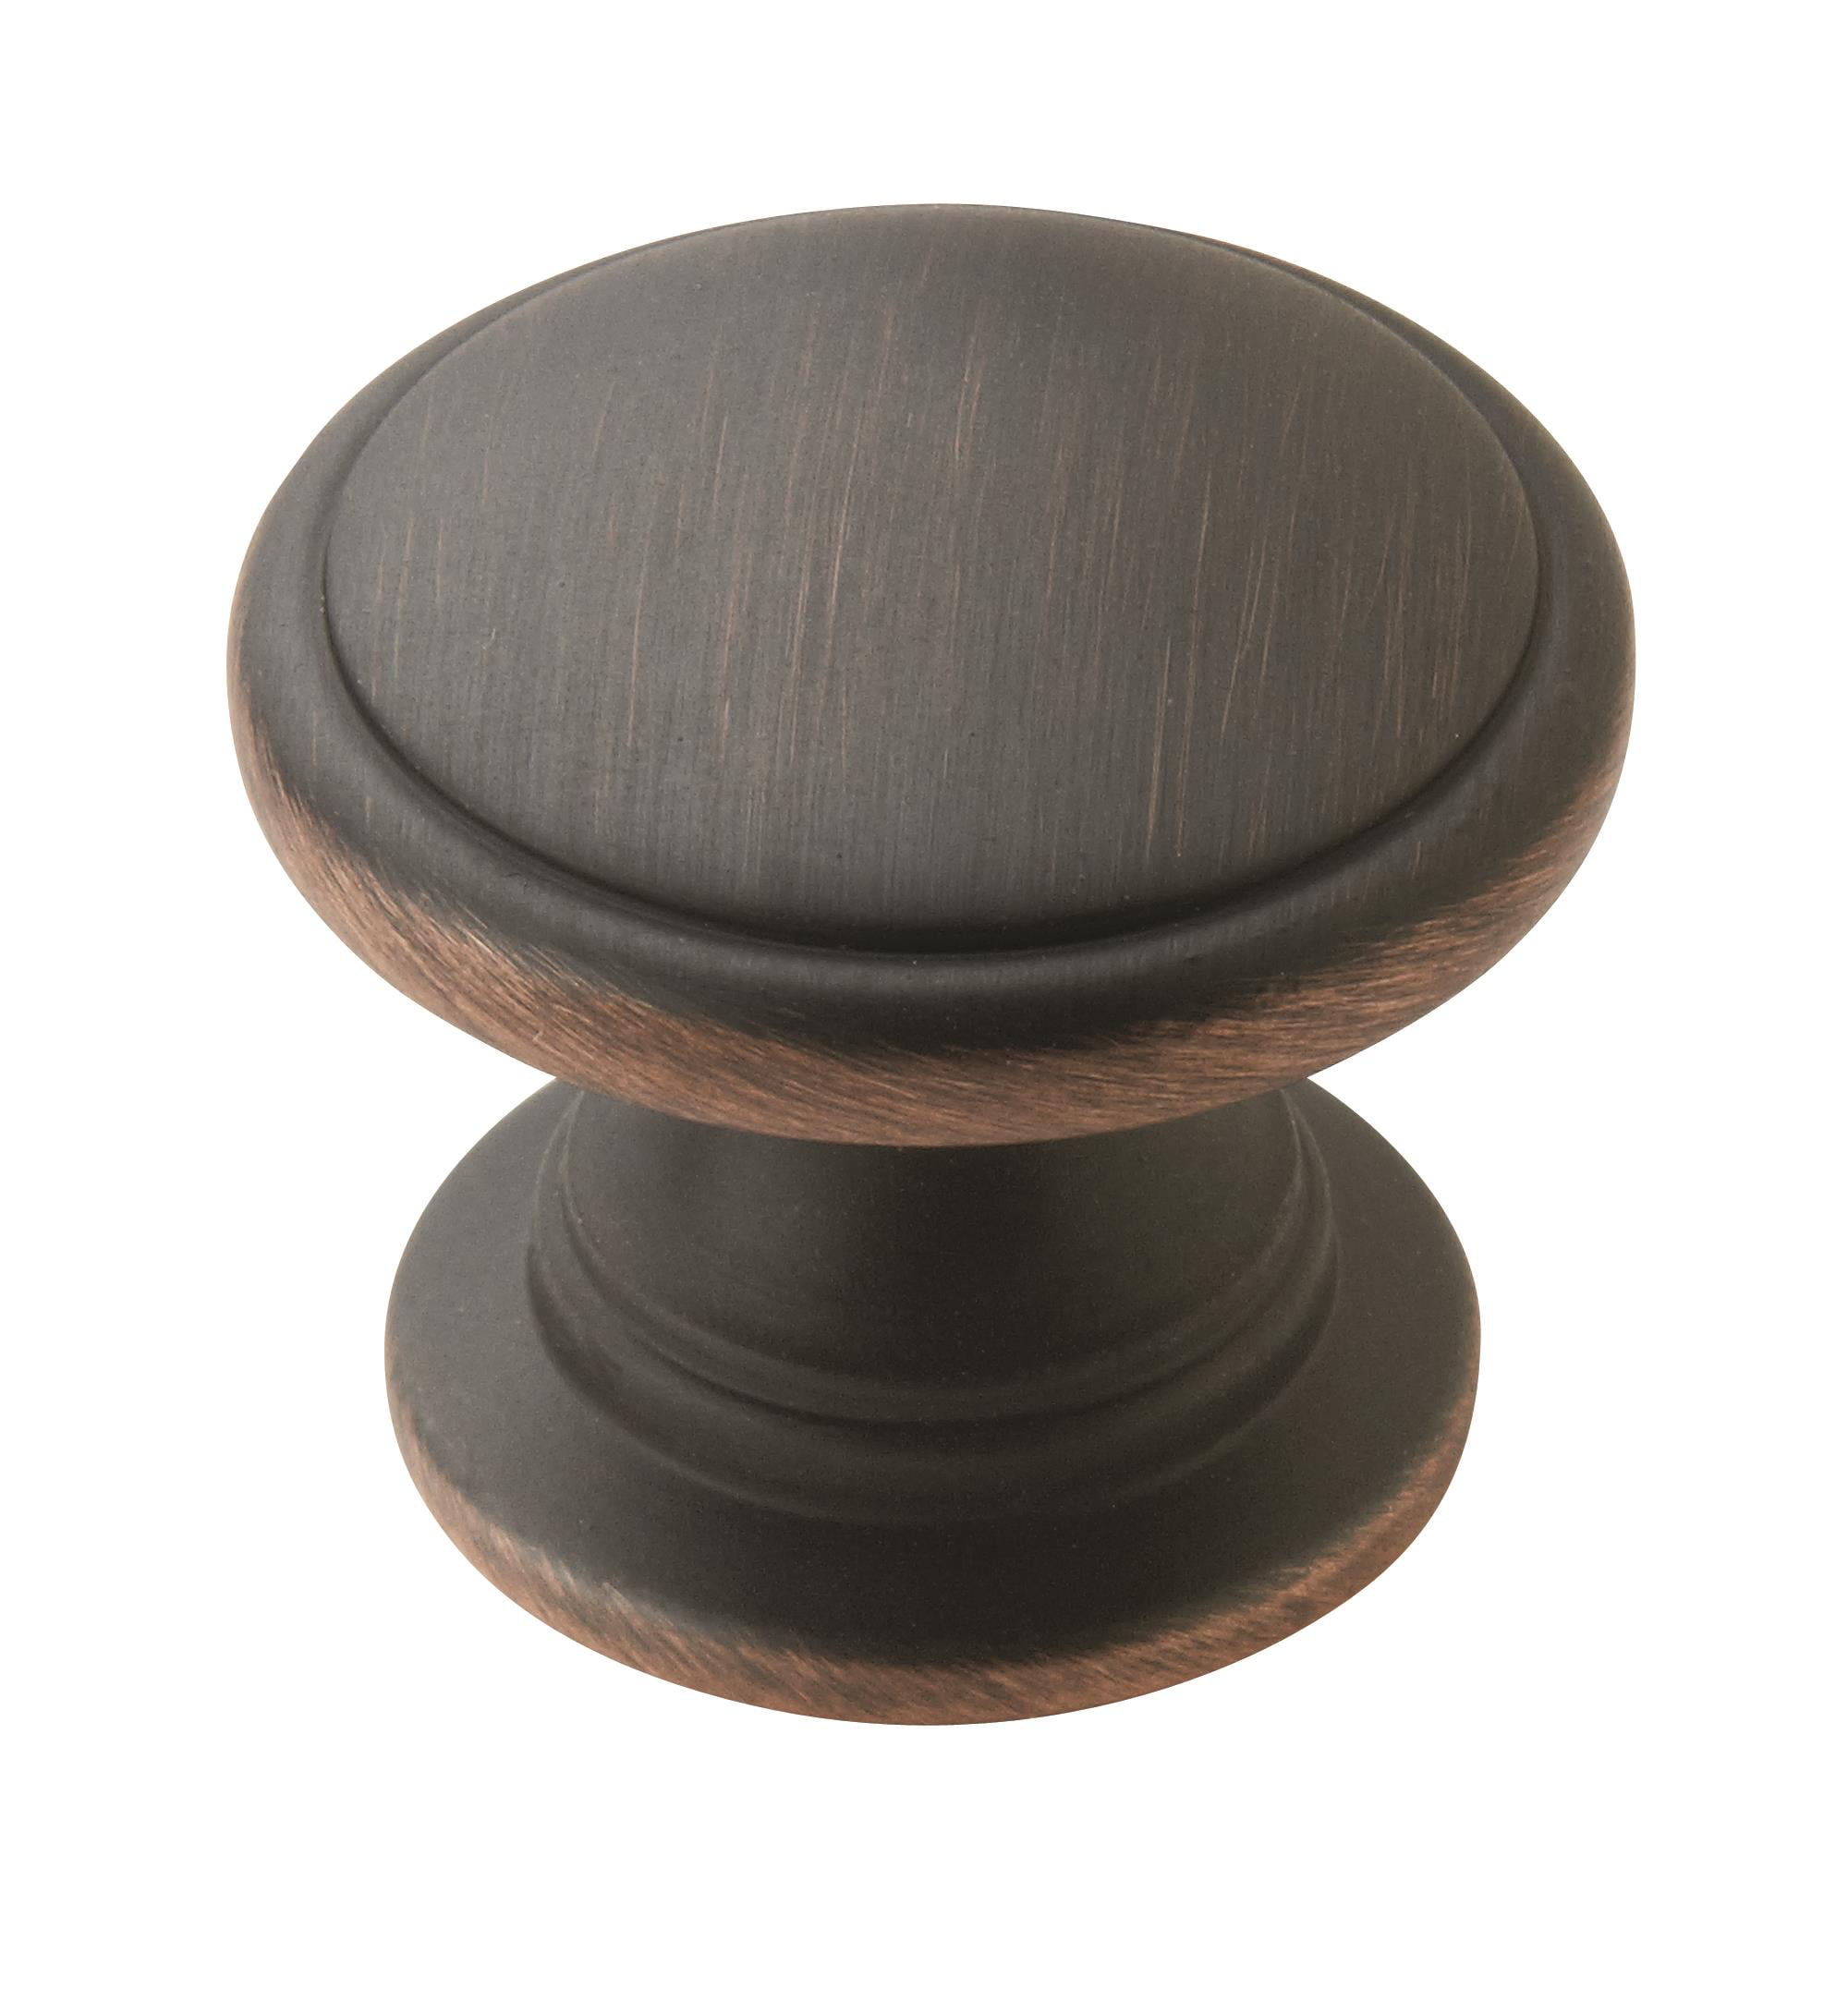 BP4425ORB AMEROCK FORGINGS KITCHEN CABINET KNOBS 1-1/4" OIL RUBBED BRONZE 